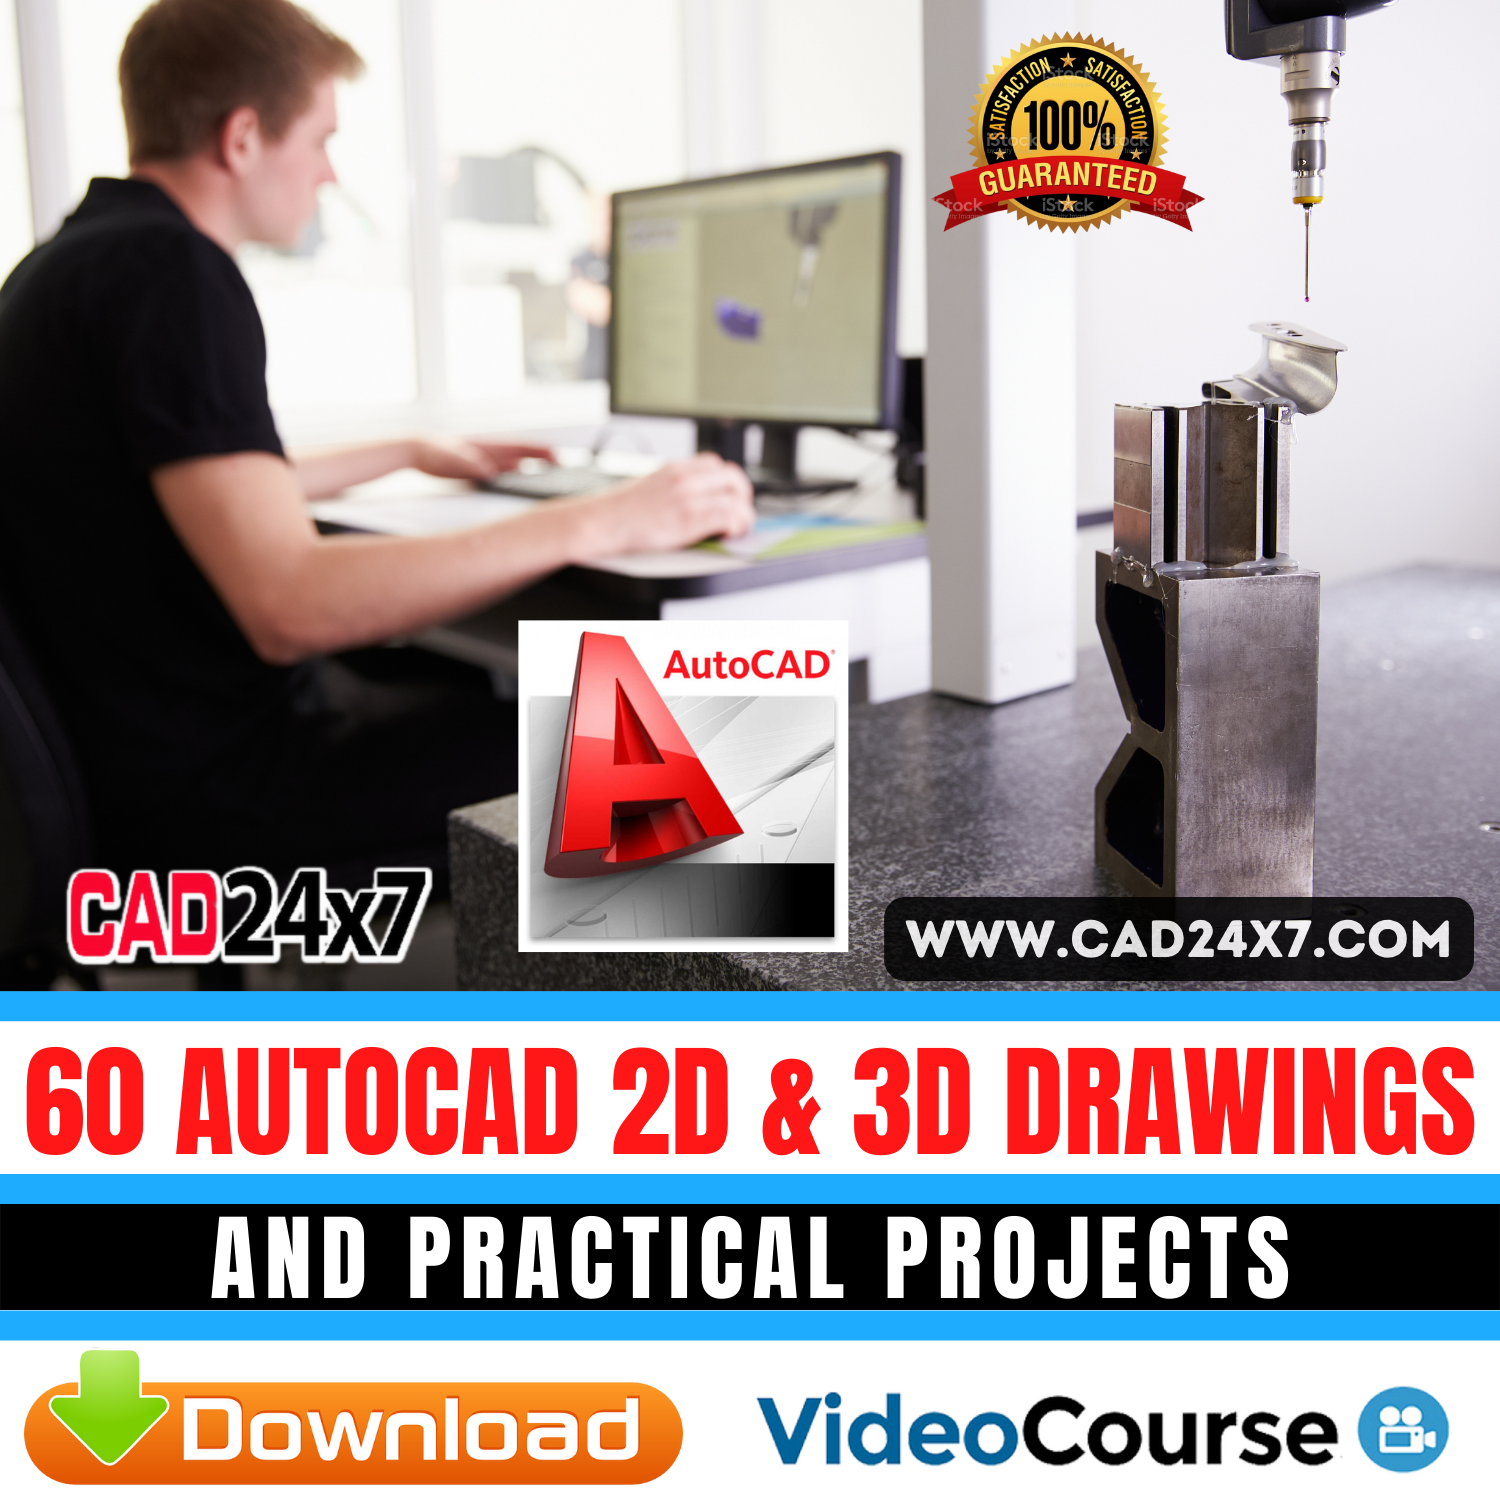 AutoCAD 2D & 3D Drawings and Practical Projects